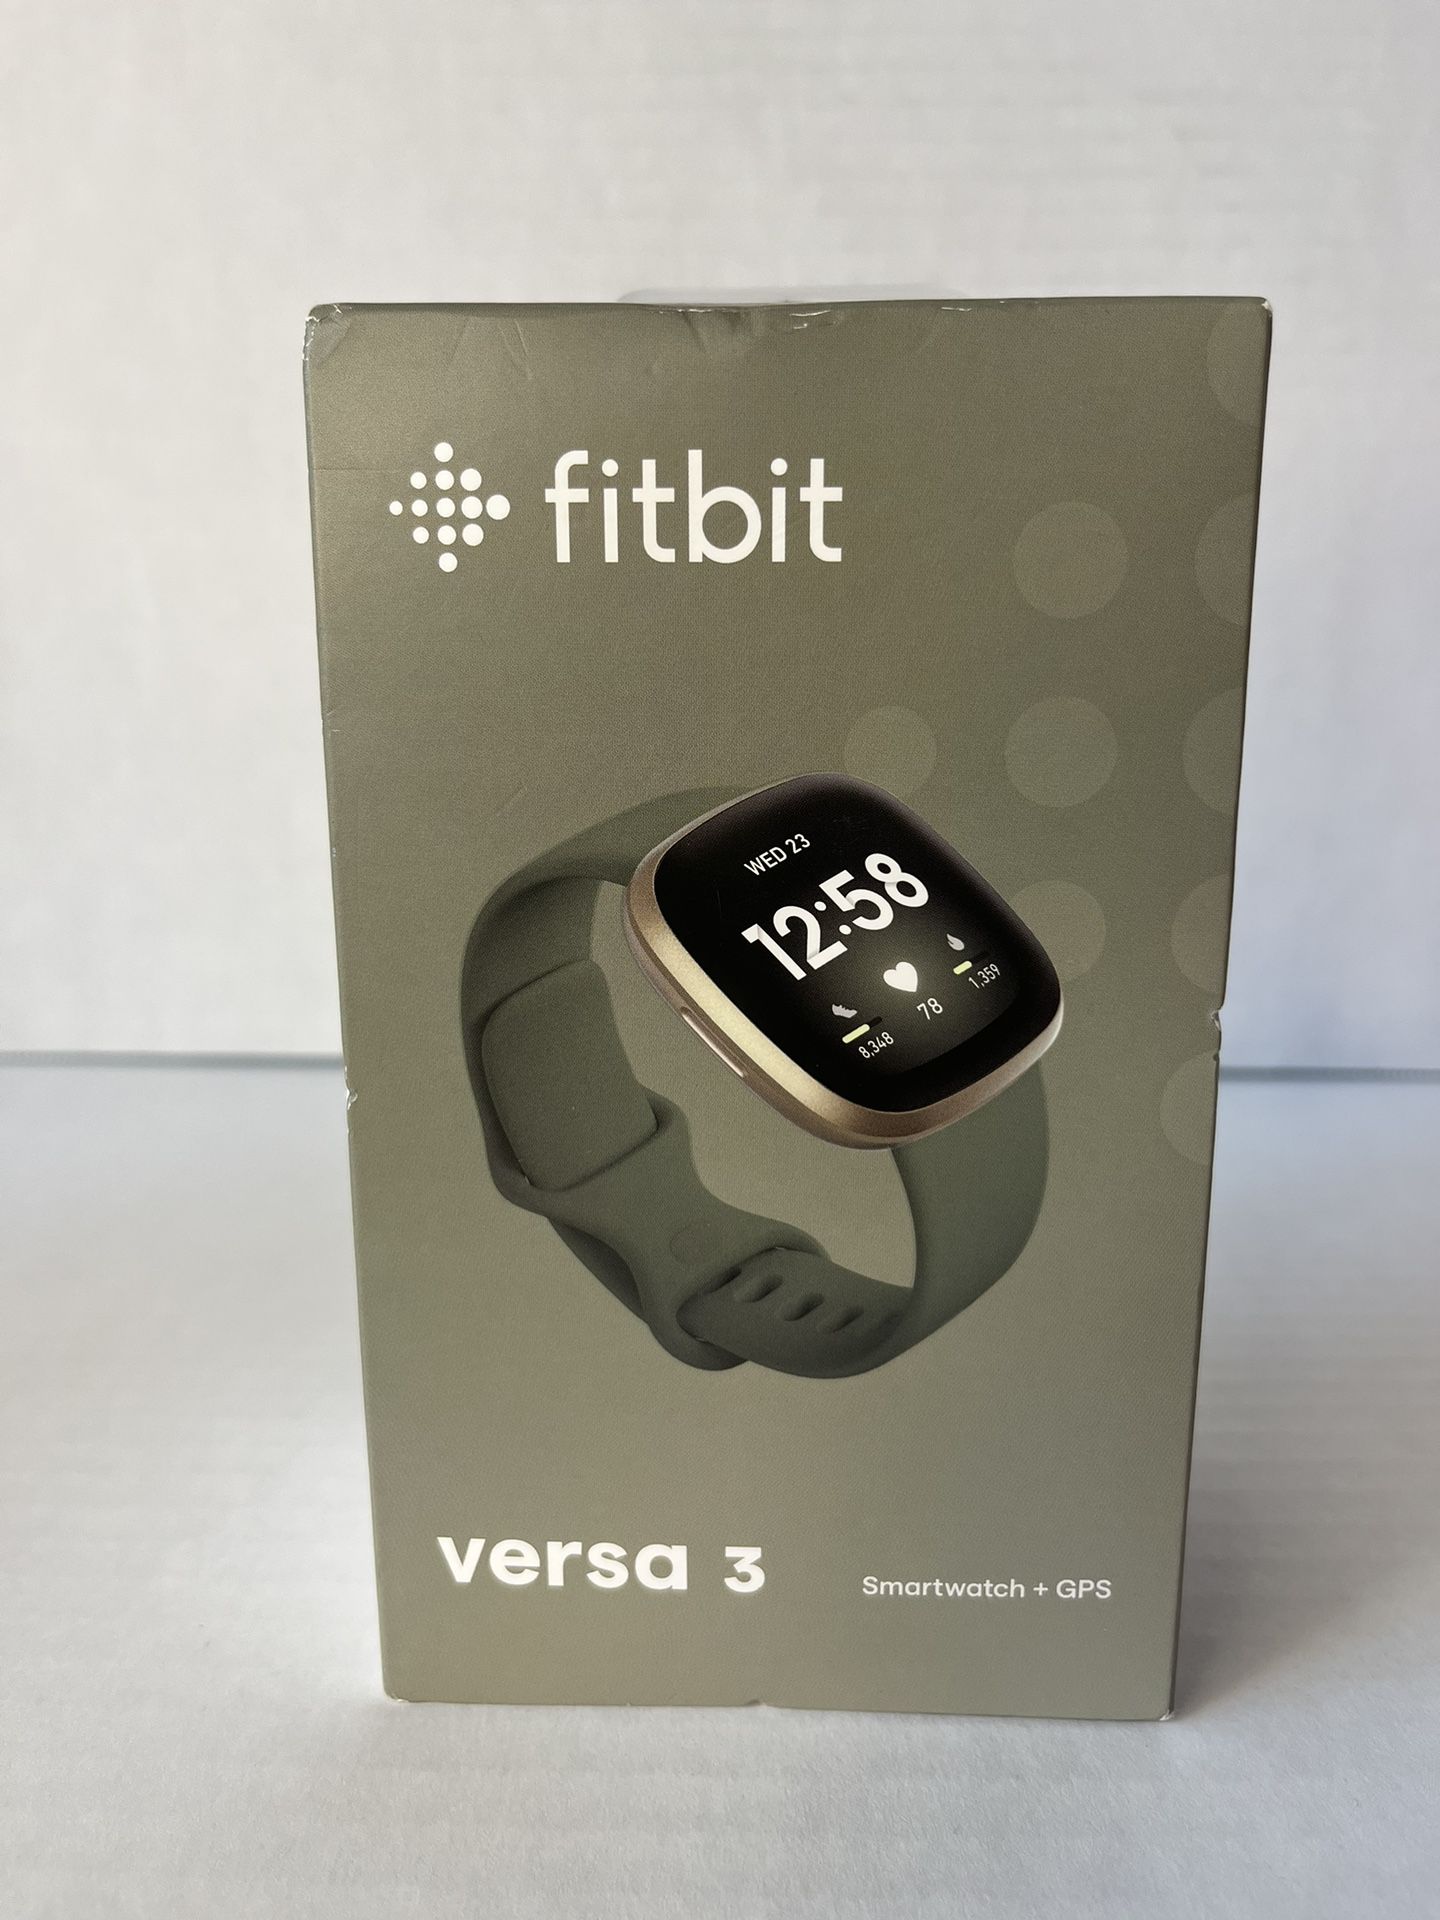 Fitbit Versa 3 Smartwatch+GPS Heart Rate Soft Gold Case Olive Green